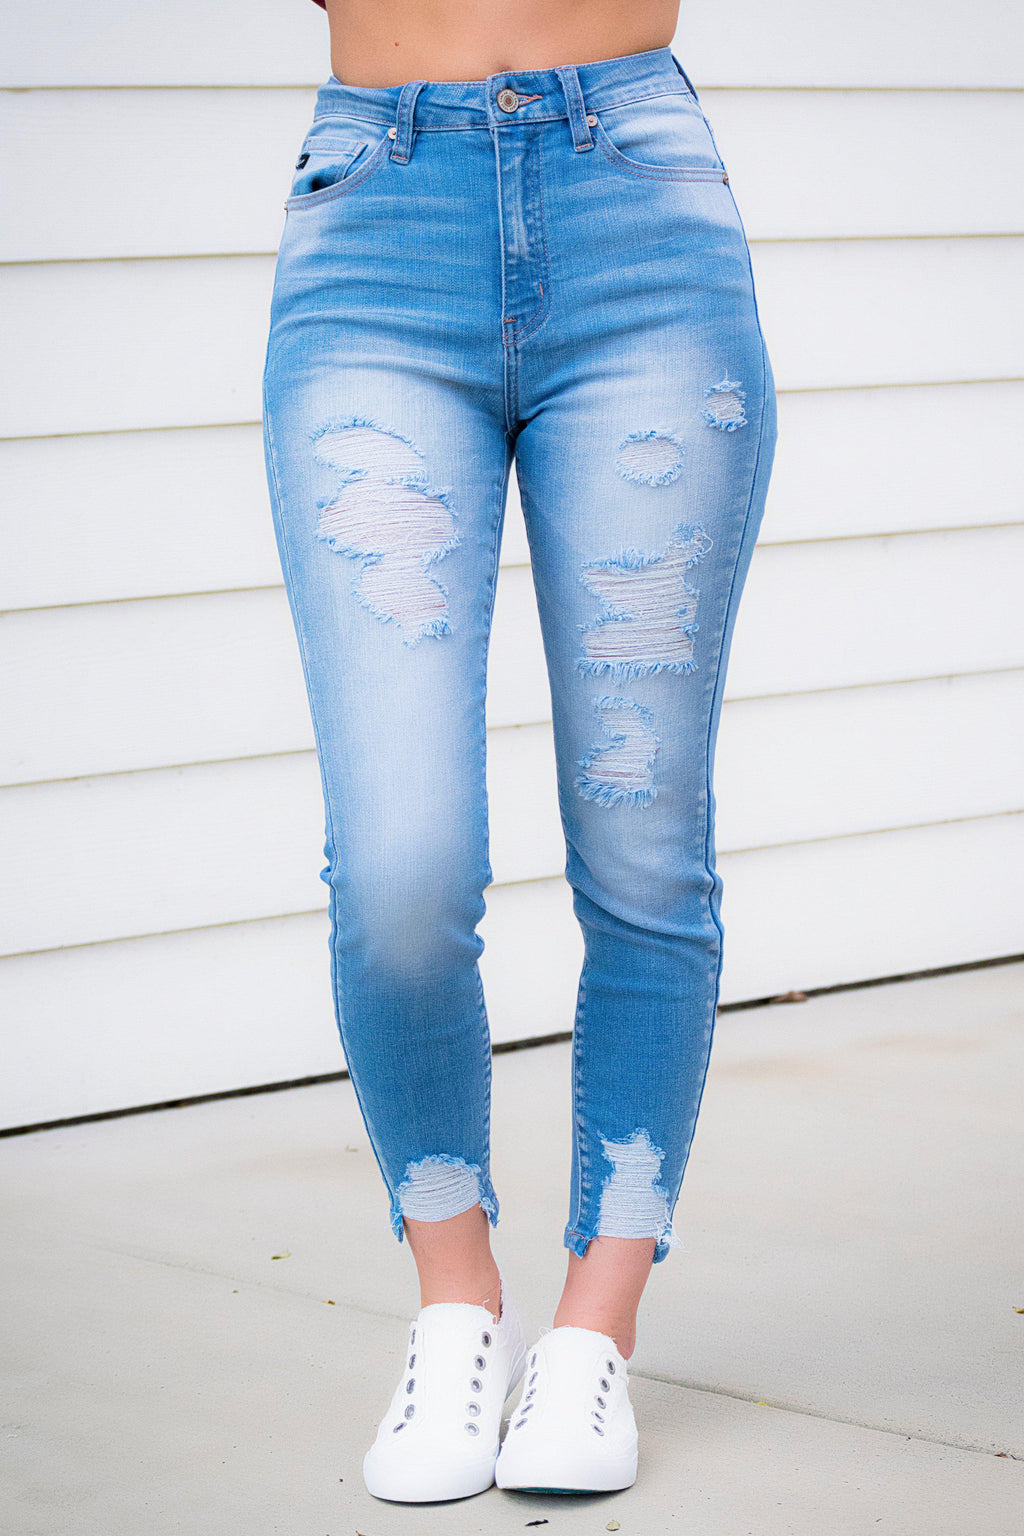 Zoey Distressed KanCan Jeans - 512 Boutique